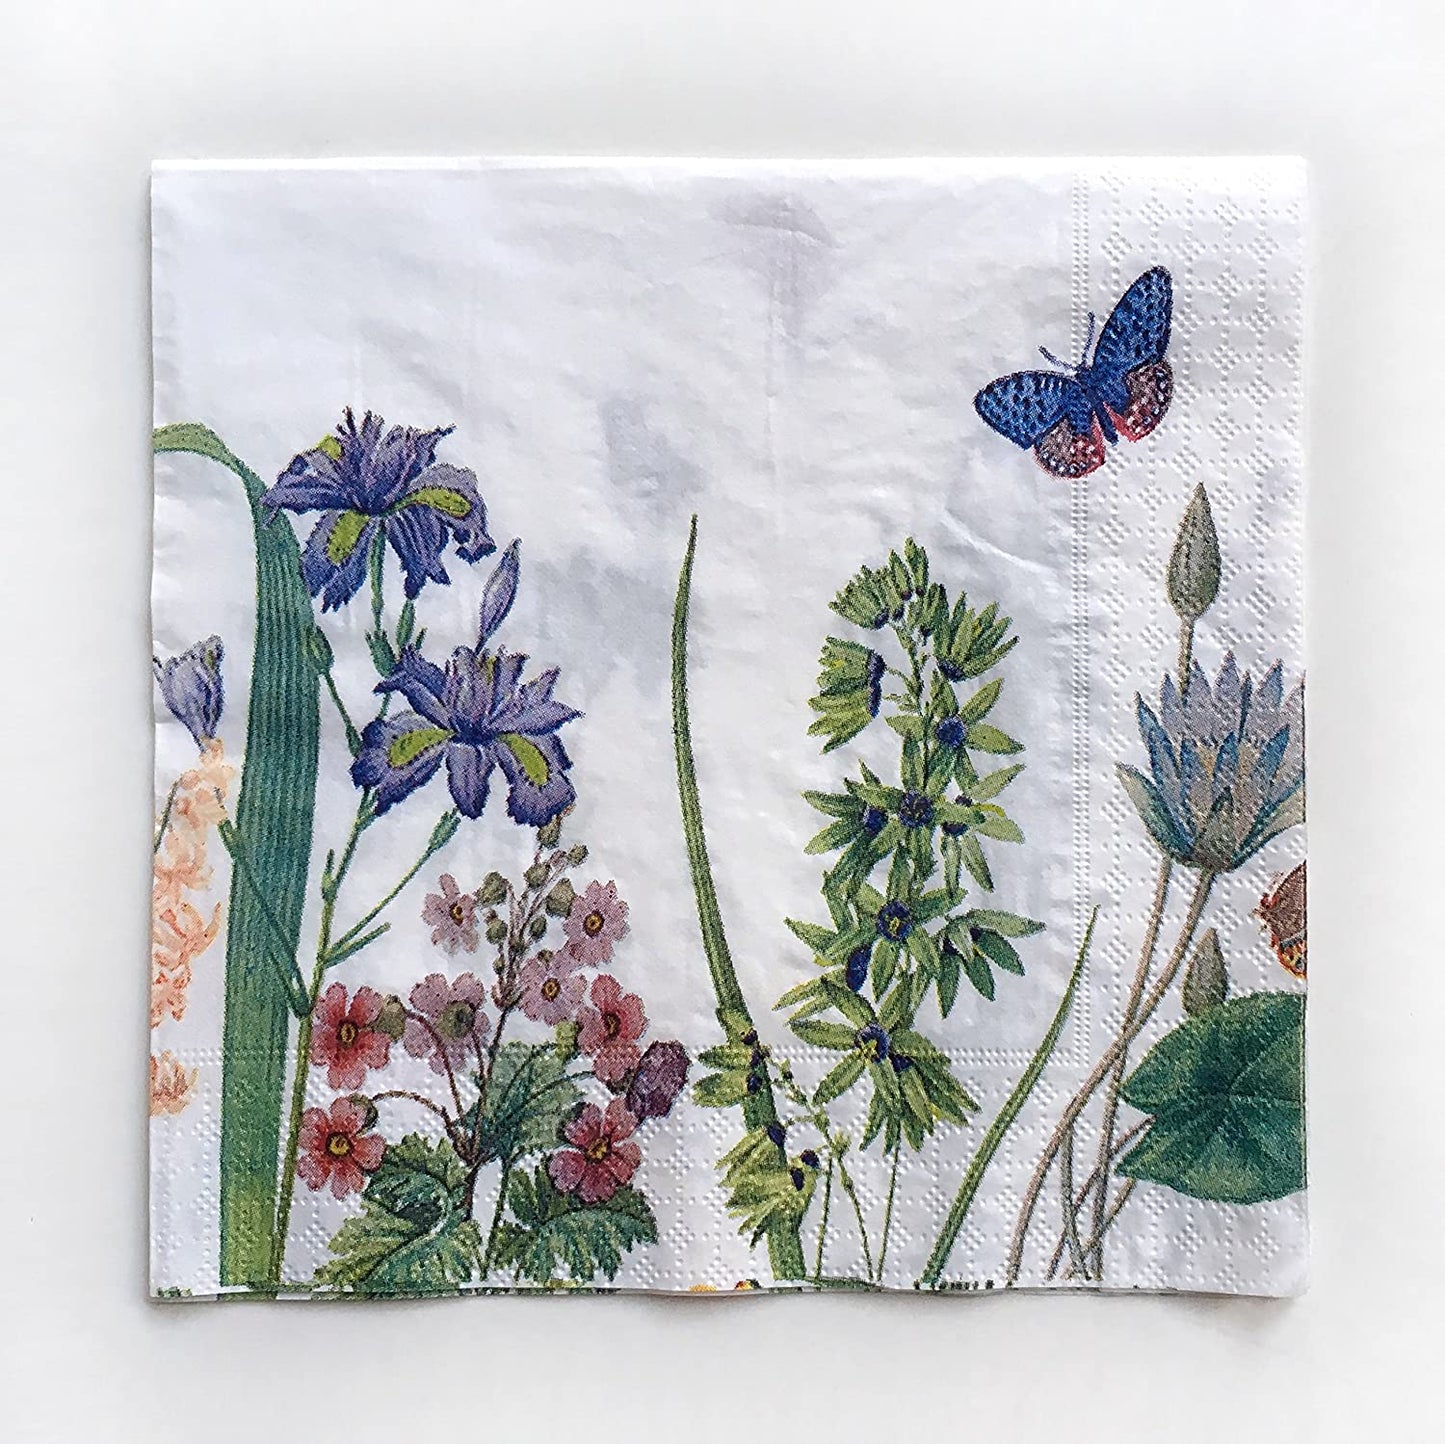 Iris & Butterfly Paper Luncheon Napkins in White - 20 Per Package